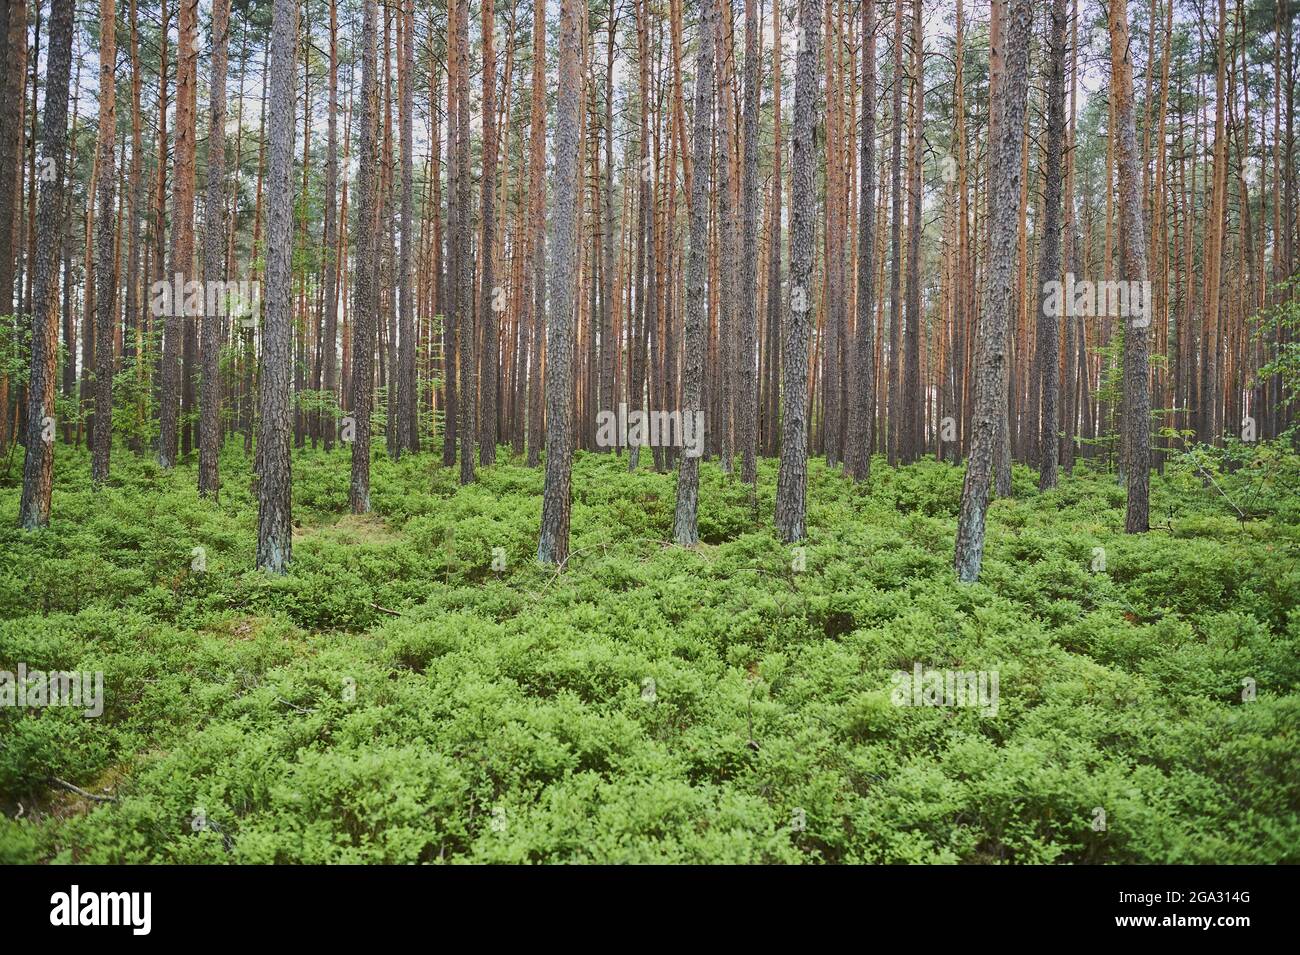 Scots pine or European red pine (Pinus sylvestris) forest with young European blueberry (Vaccinium myrtillus) bushes; Bavaria, Germany Stock Photo